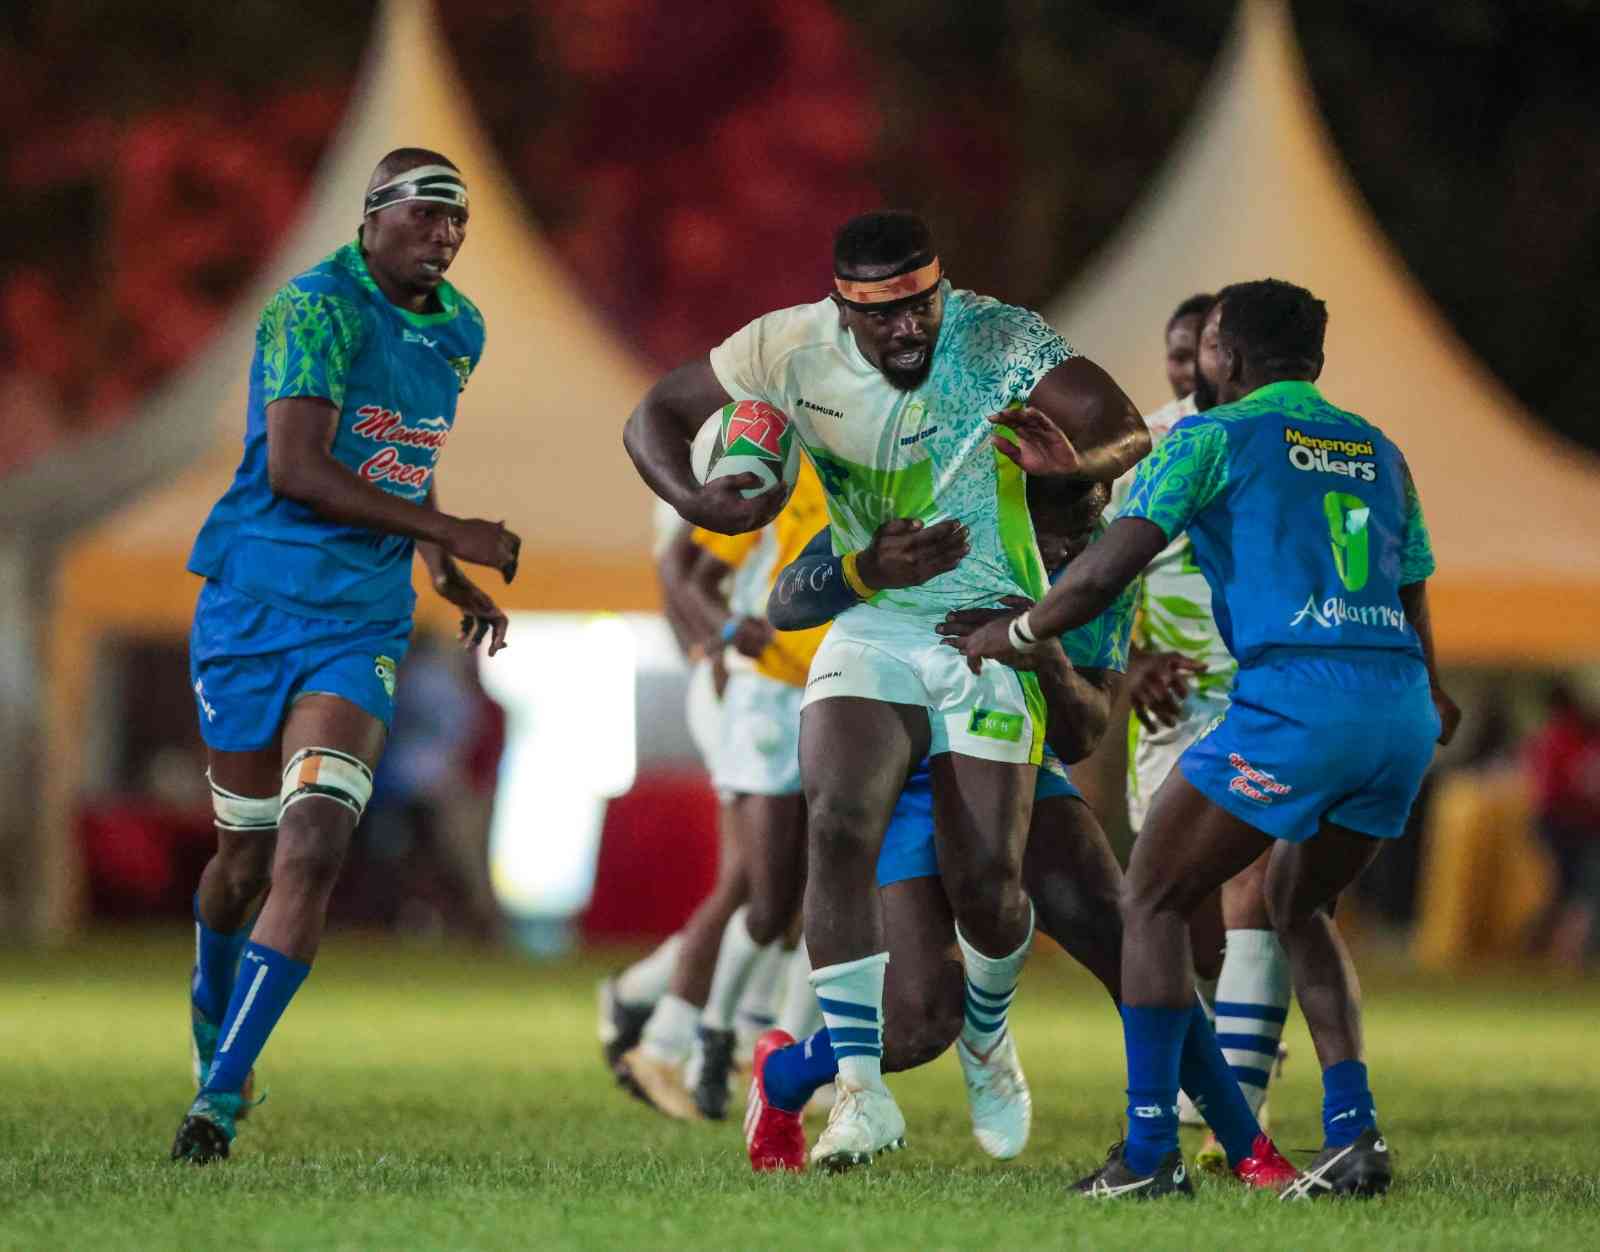 KCB to play Nondies in the Floodlit finals